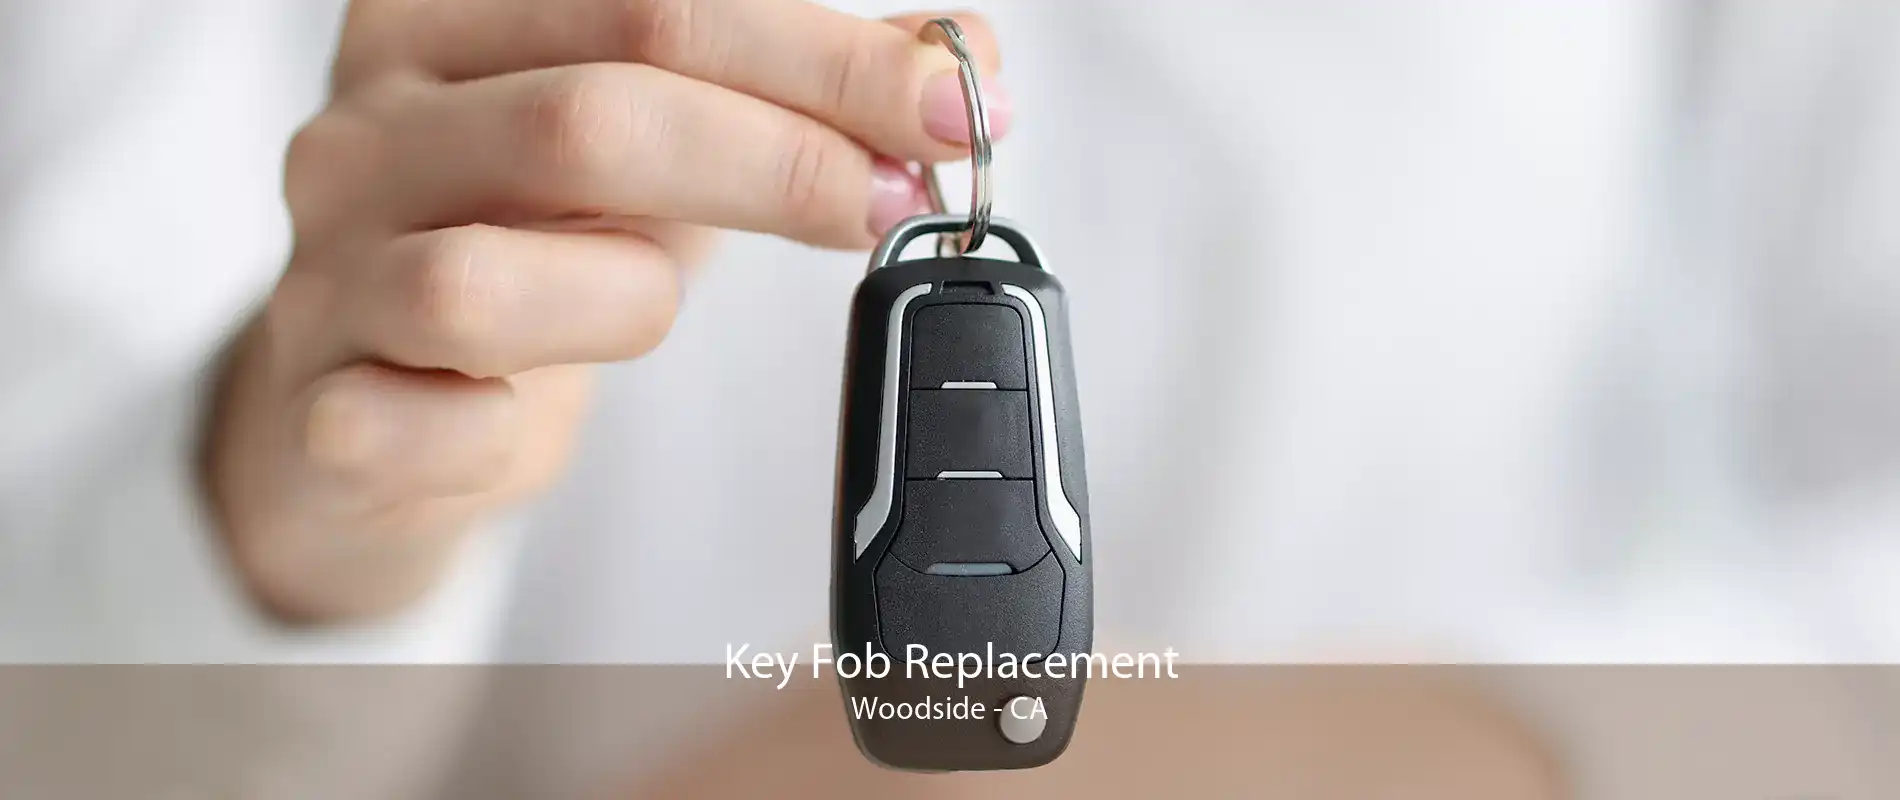 Key Fob Replacement Woodside - CA